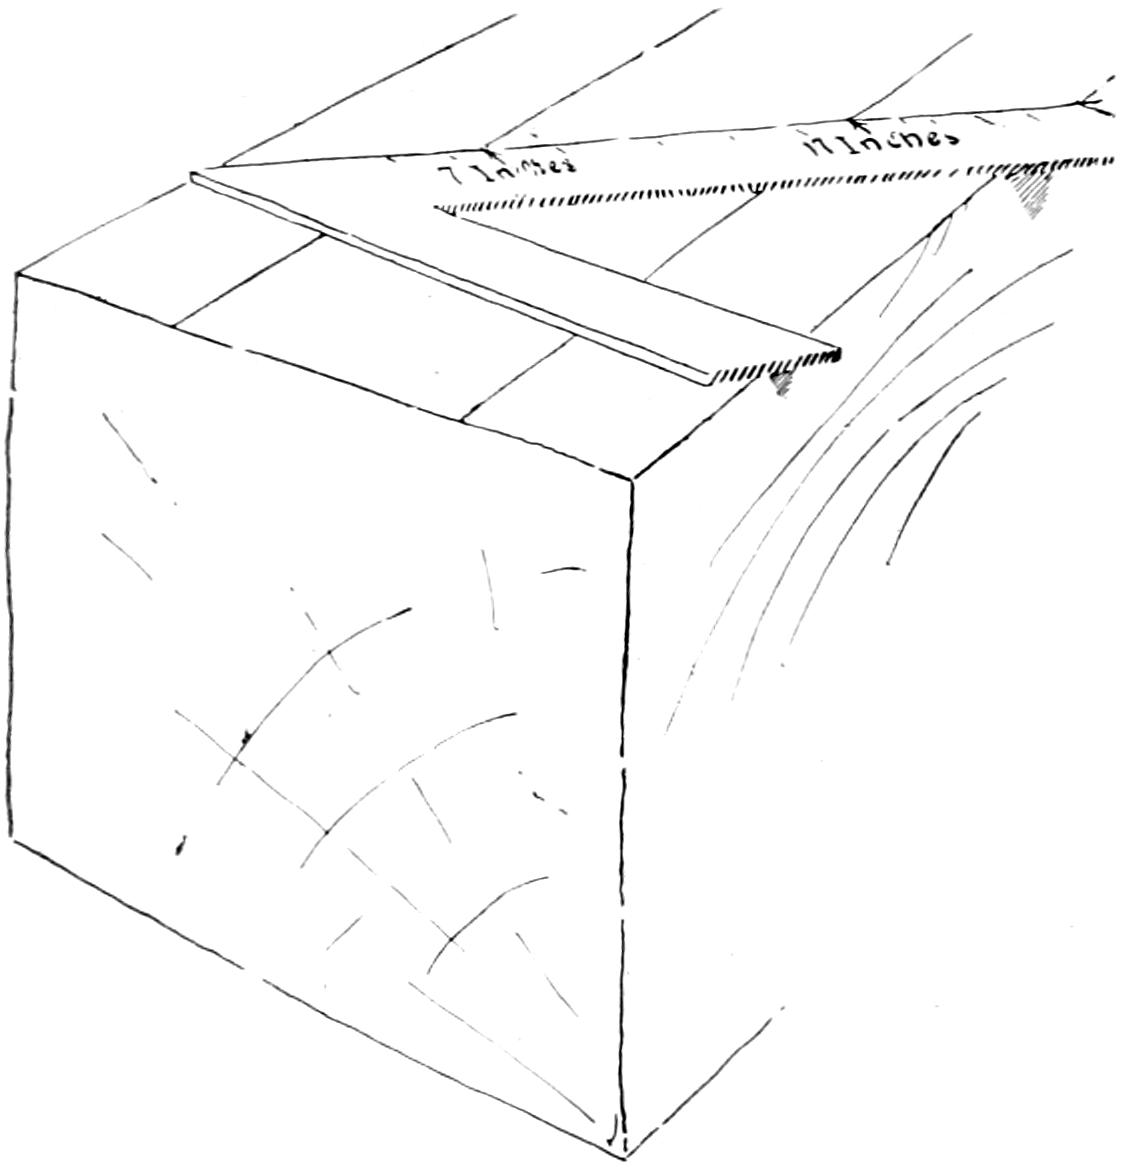 Using steel-square to divide block